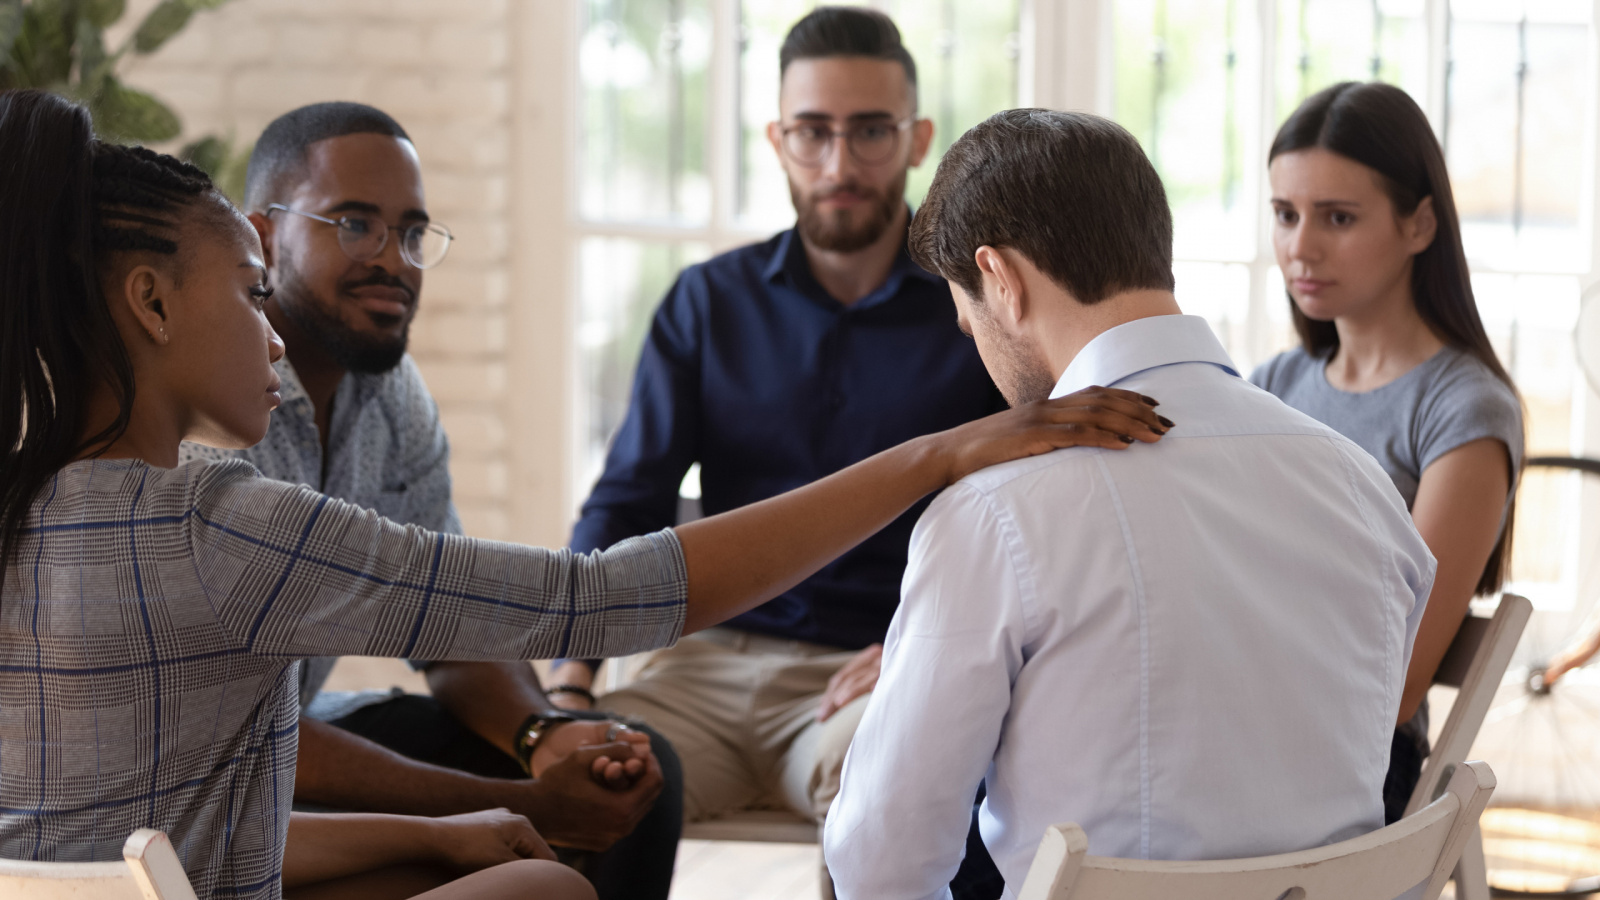 Group counseling session with someone consoling another person